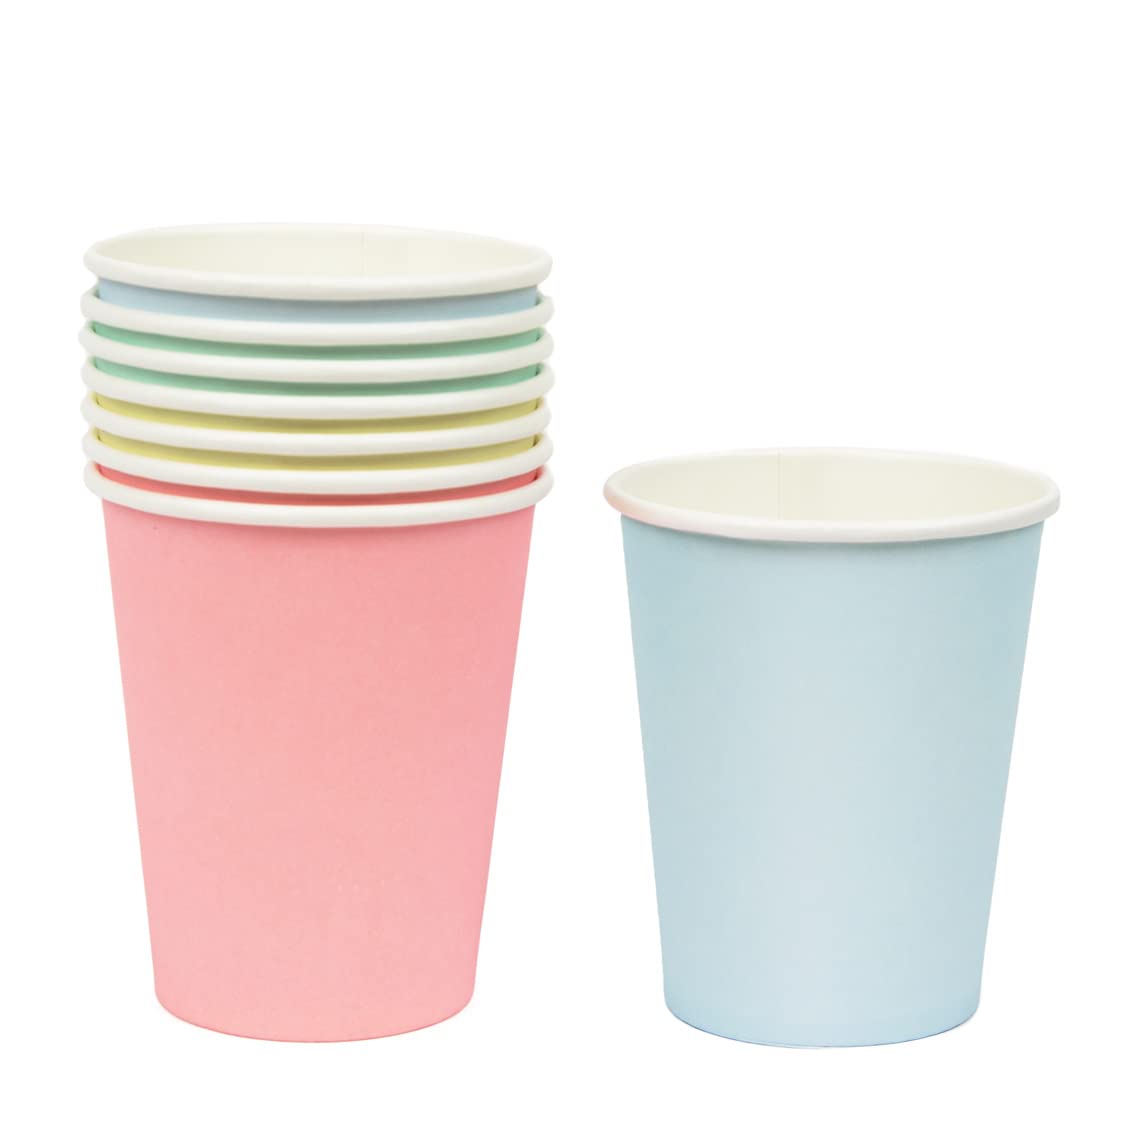 Talking Tables - Pastel Paper Cups - Recyclable Paper Tableware for Birthdays, Office Parties, Baby Showers - 8 Pack